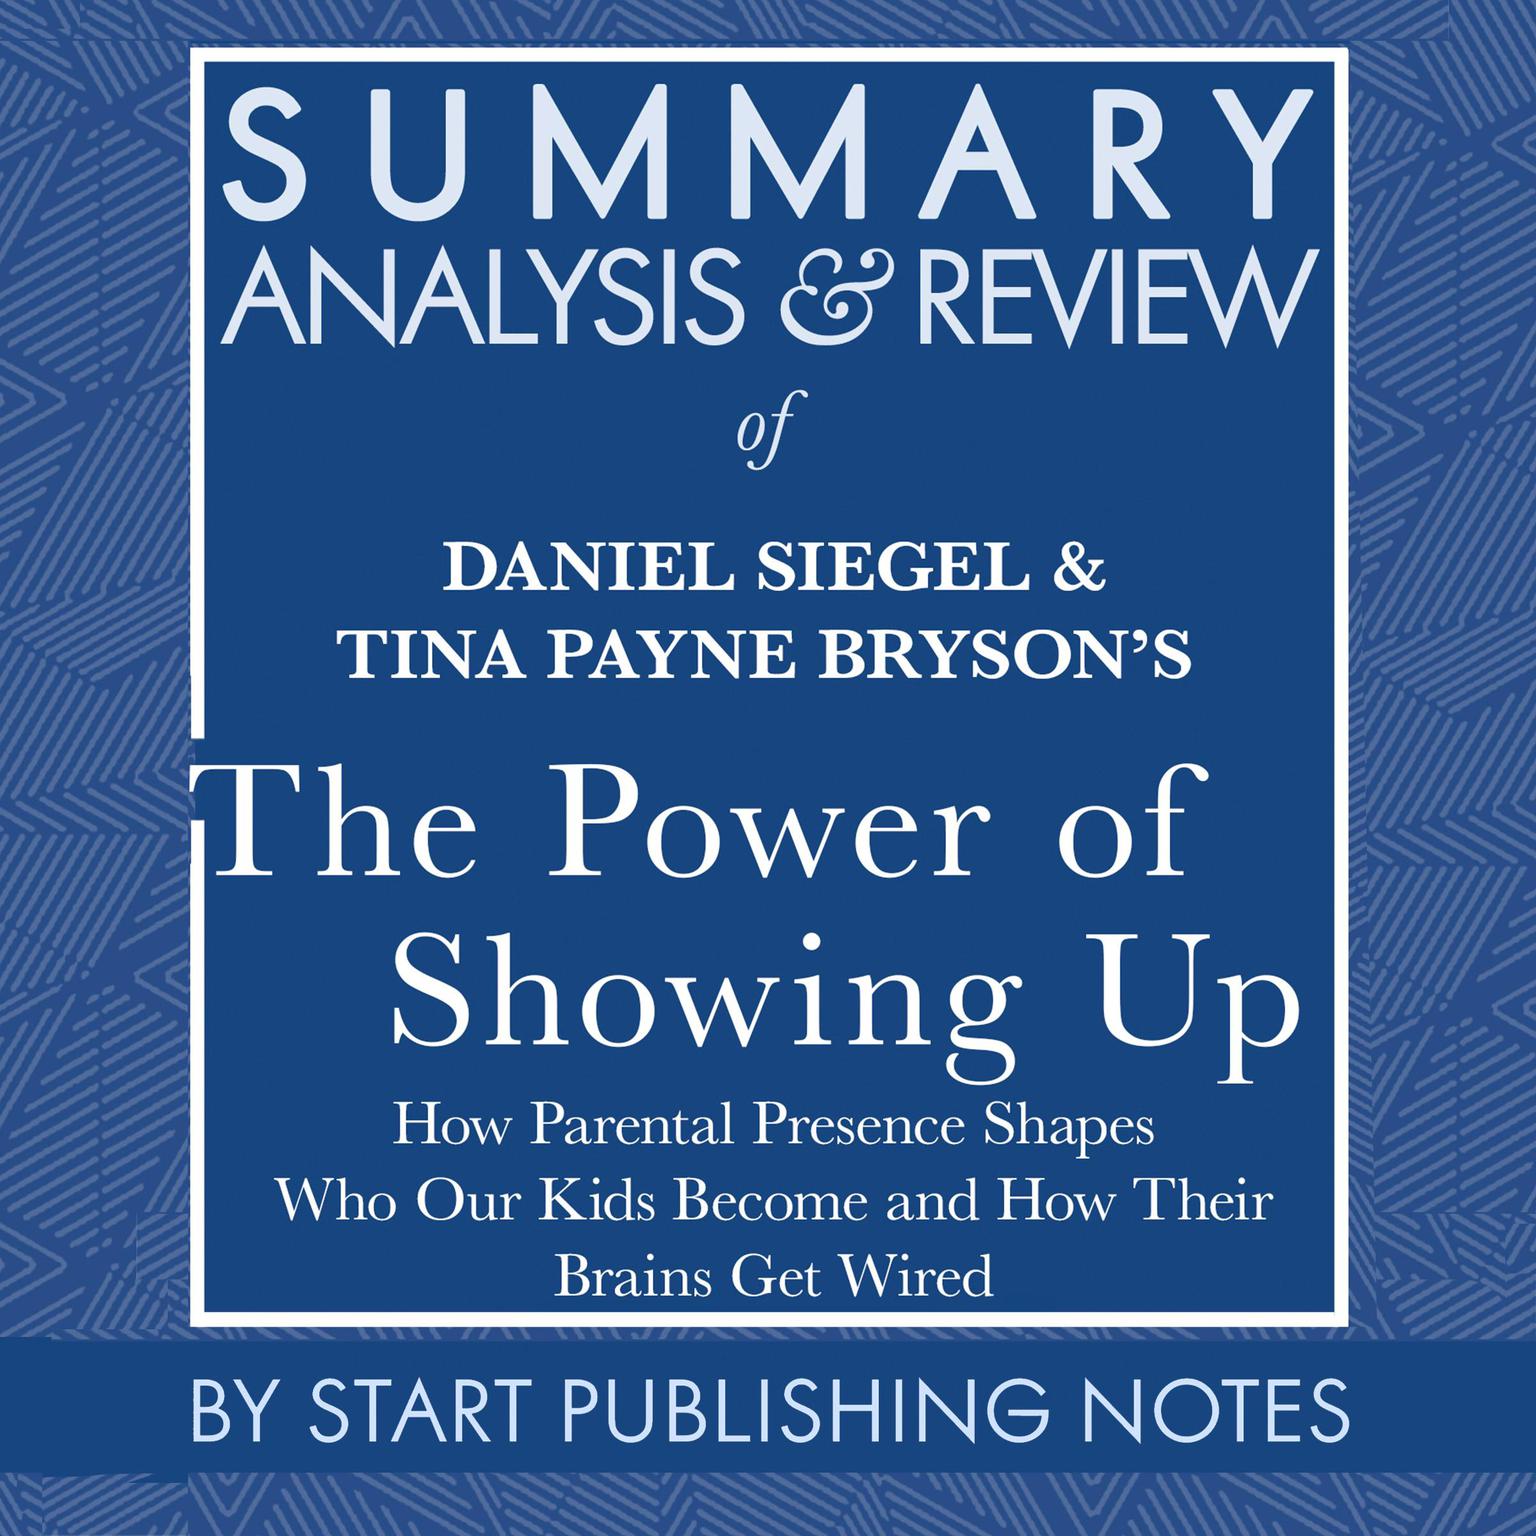 Summary, Analysis, and Review of Daniel Siegel and Tina Payne Brysons The Power of Showing Up: How Parental Presence Shapes Who Our Kids Become and How Their Brains Get Wired Audiobook, by Start Publishing Notes